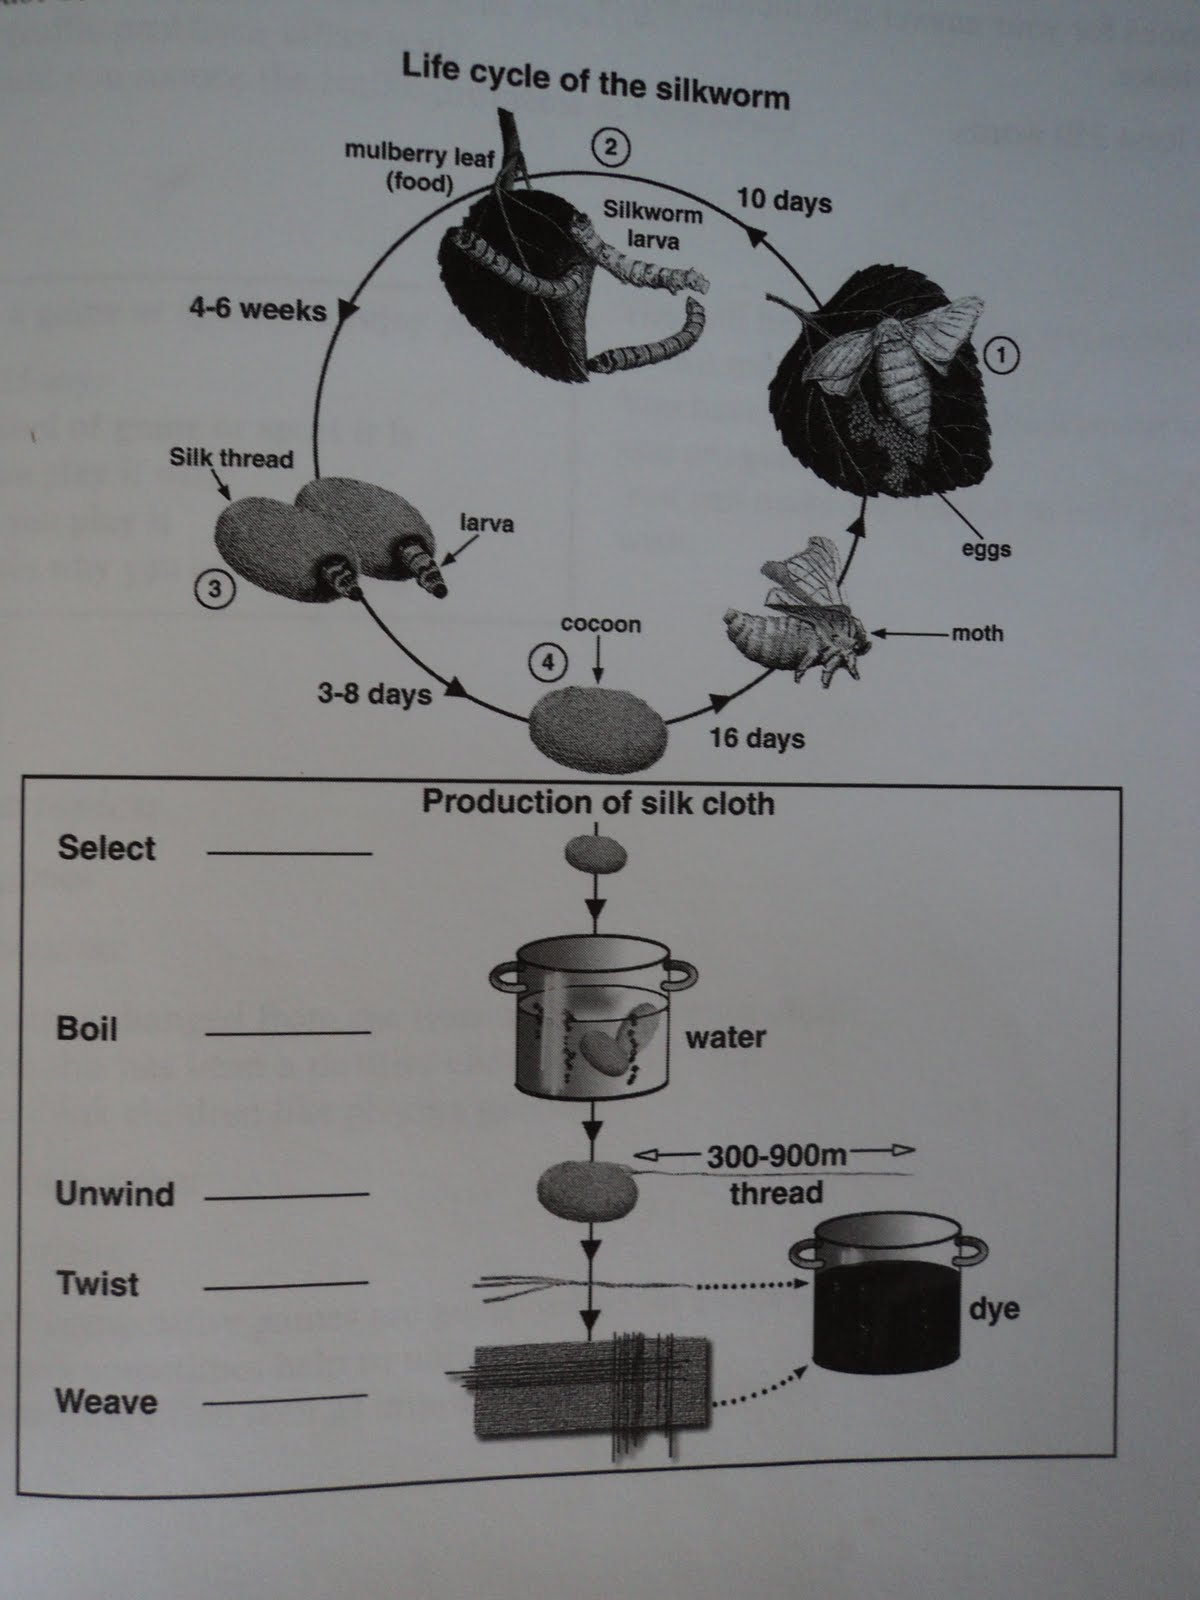 what are the steps involved in the process of silk production from cocoon